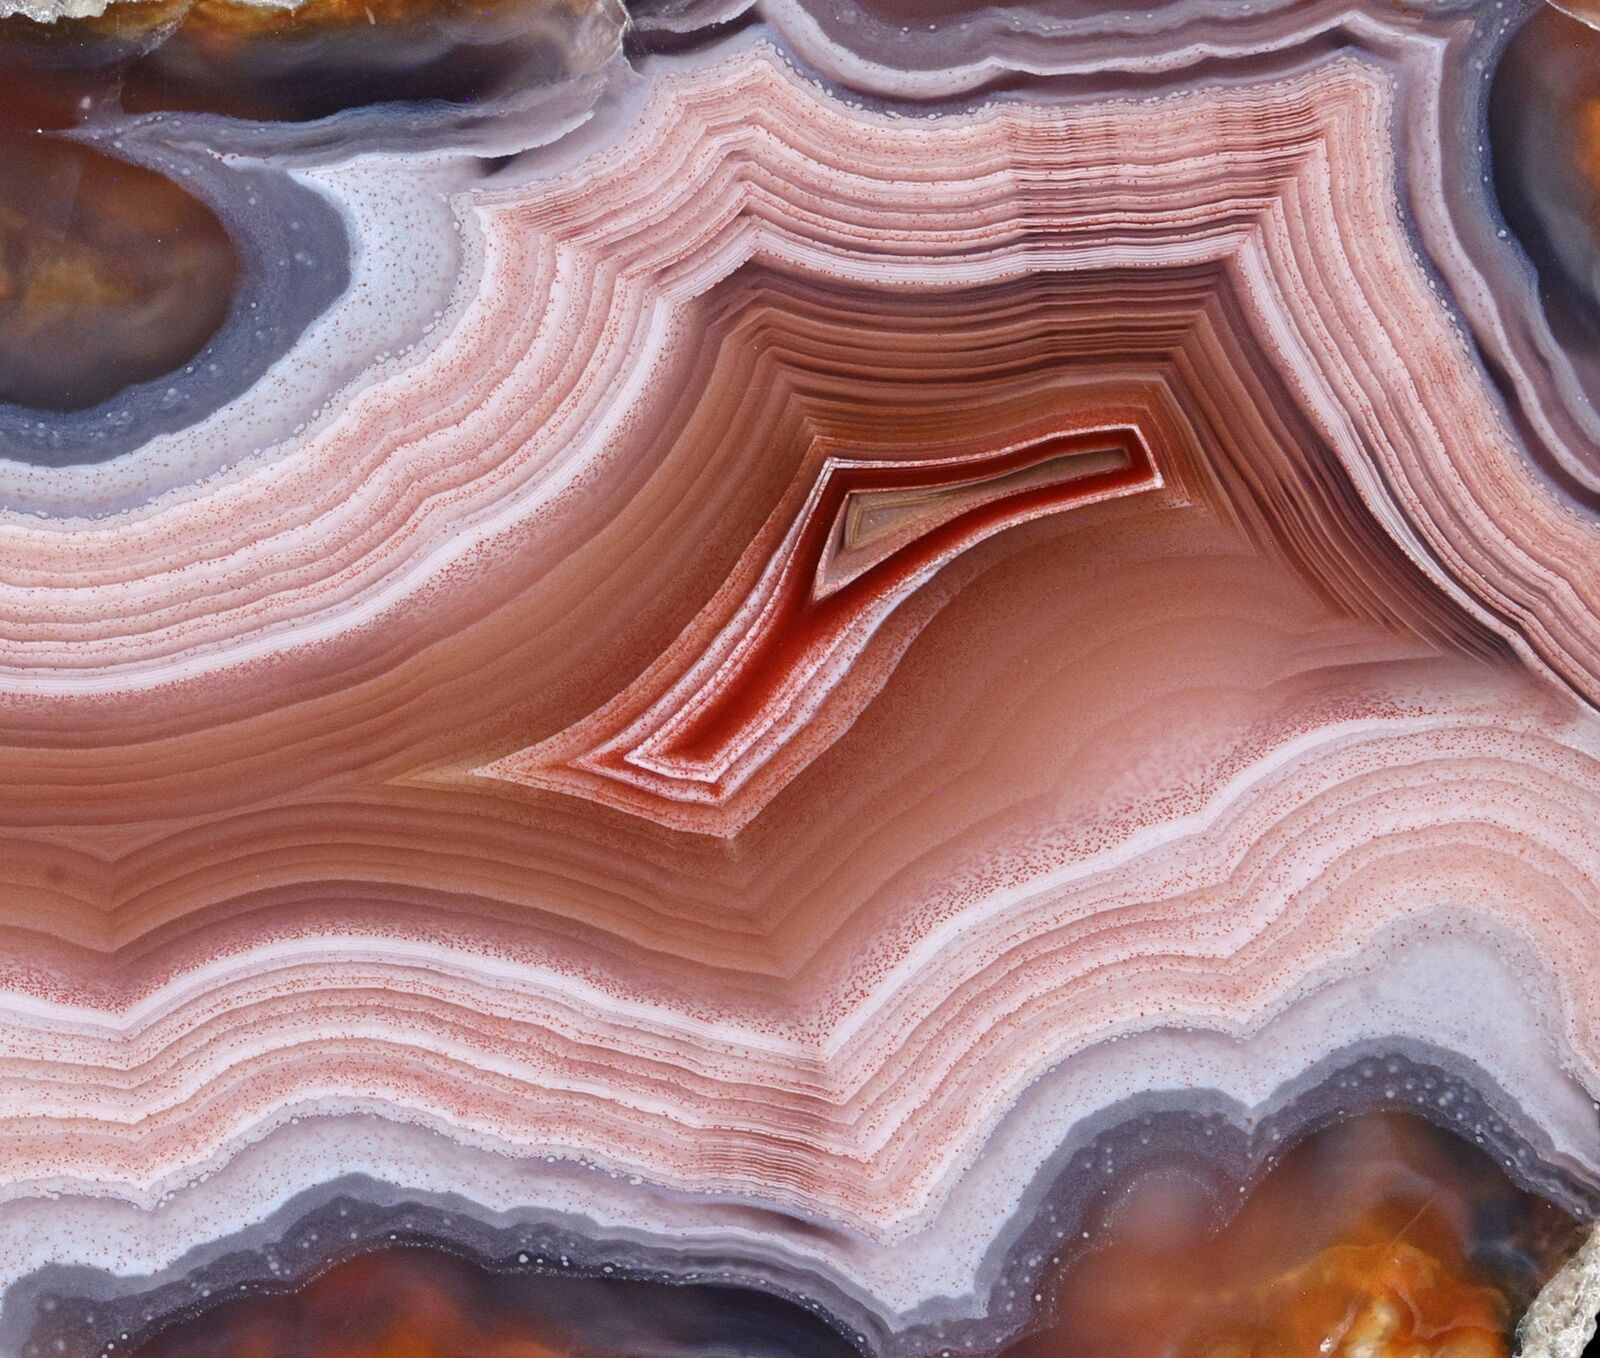 Amazing Banded Laguna Agate From Mexico Collectors Grade Parallax